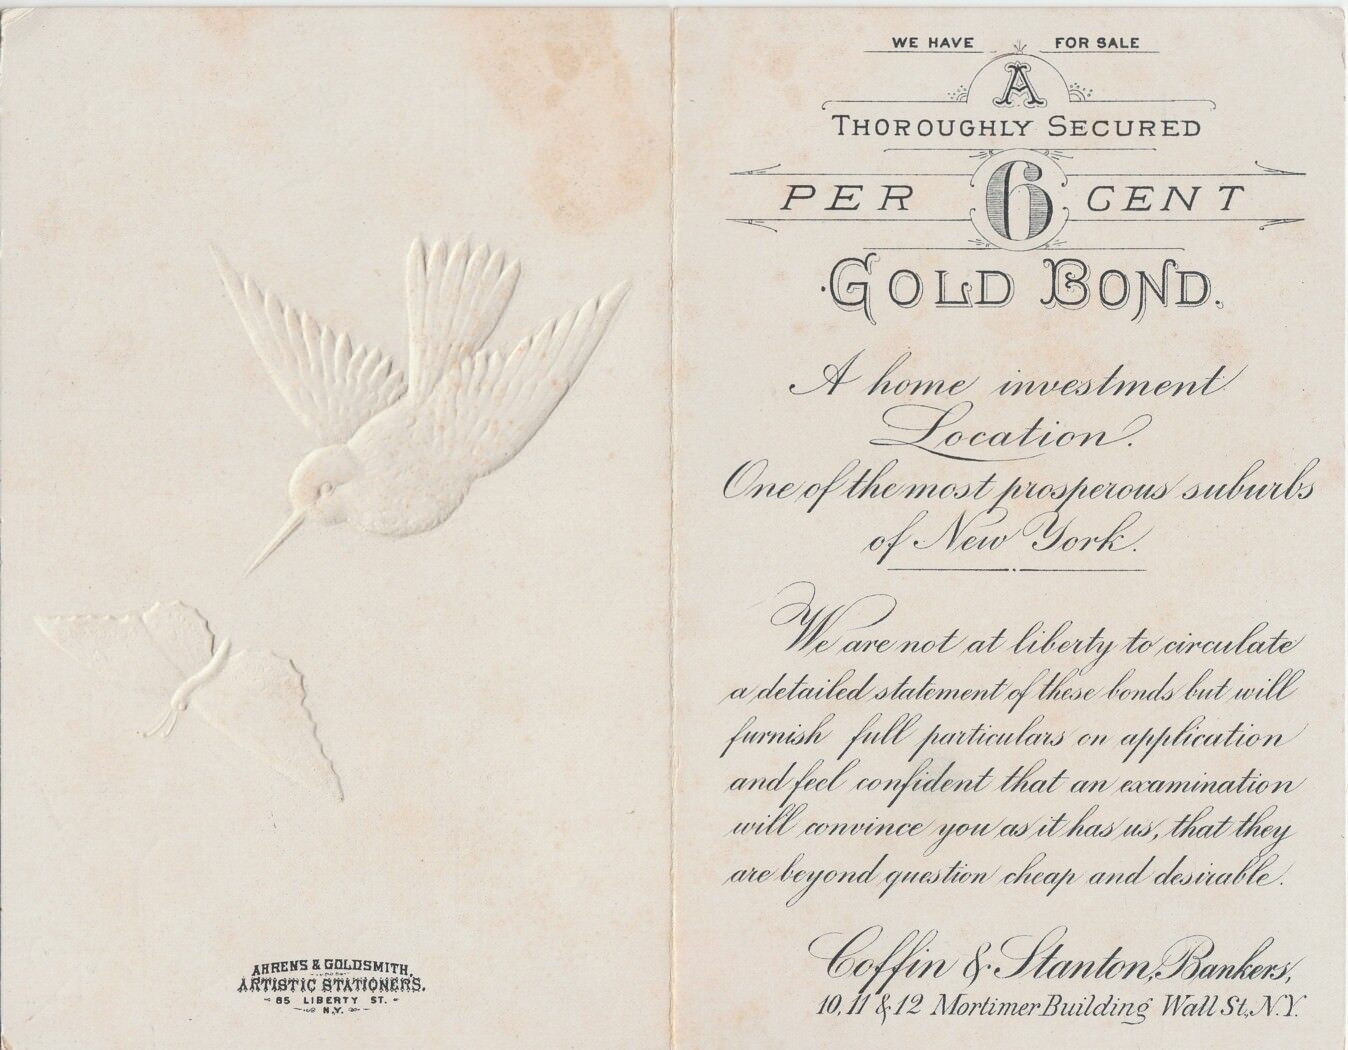 [28285] Ca. 1890\'s GOLD BOND offered by COFFIN & STANTON BANKERS, WALL ST., N.Y.